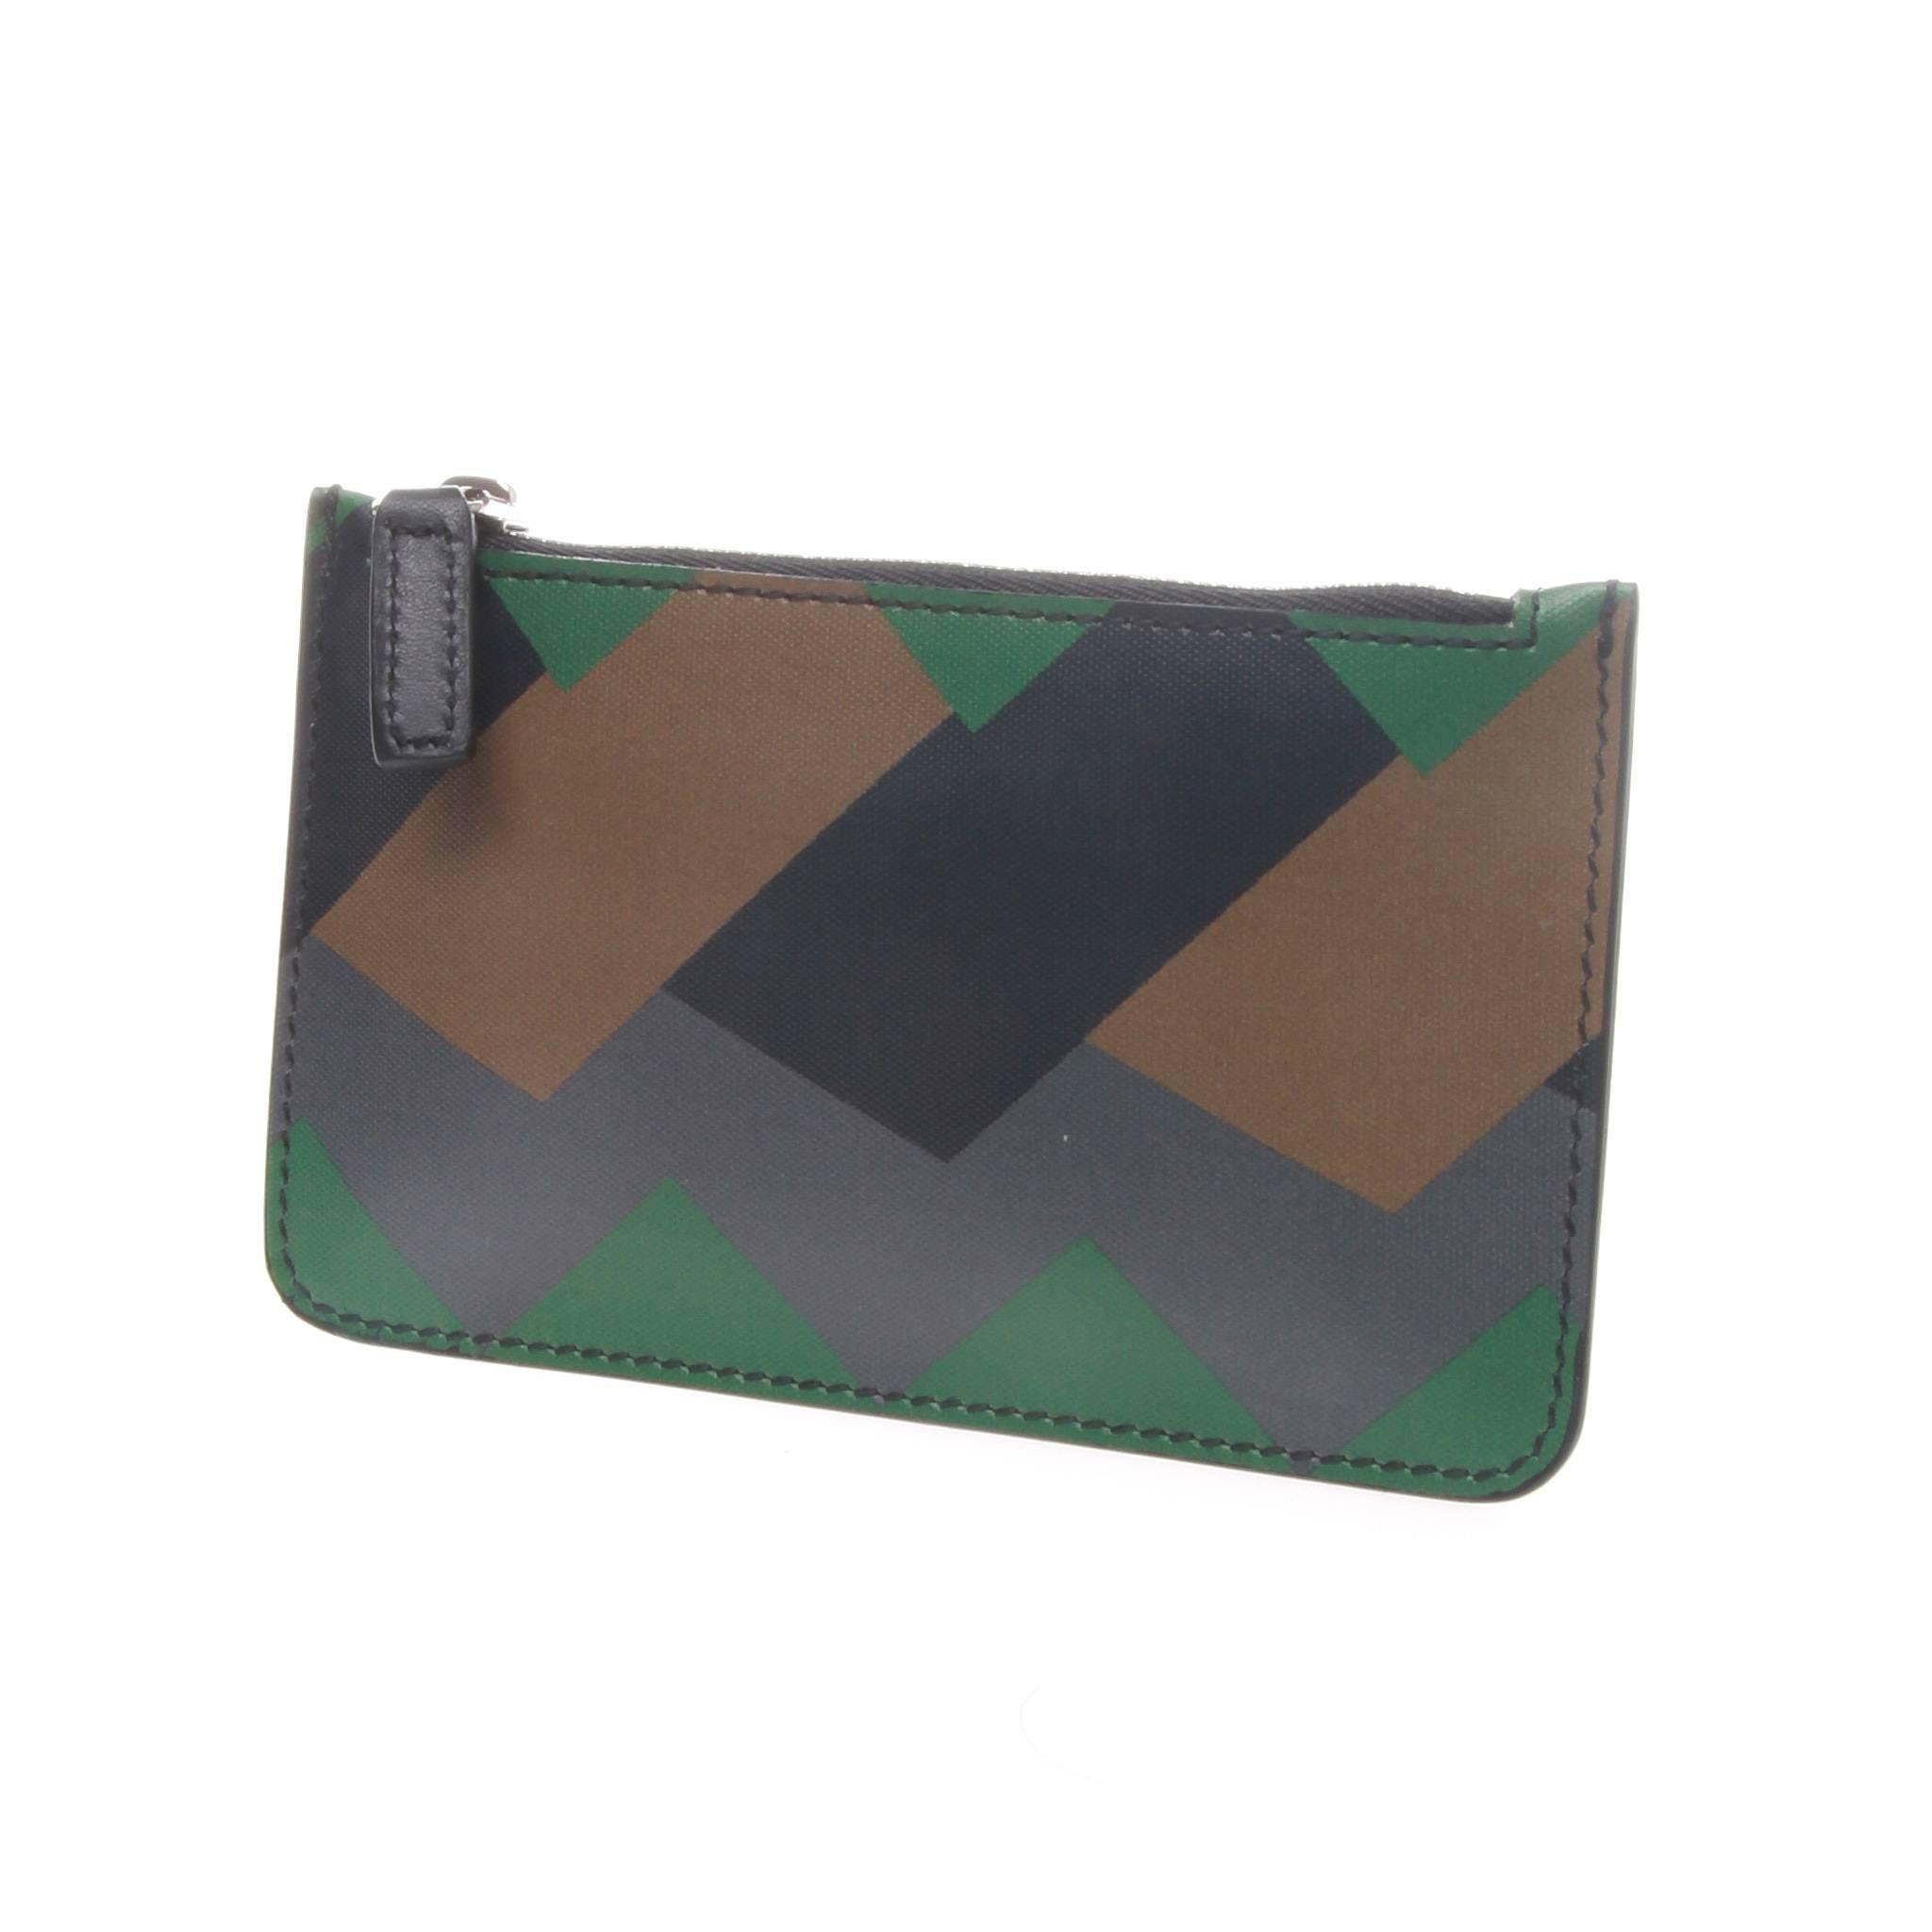 Geometric tonal grey, brown and green leather card and coin holder. Pocket sized and perfect for the essentials. 3 card slots at exterior side and a zip pocket with fabric lining. 

Comes with original and authentic box.